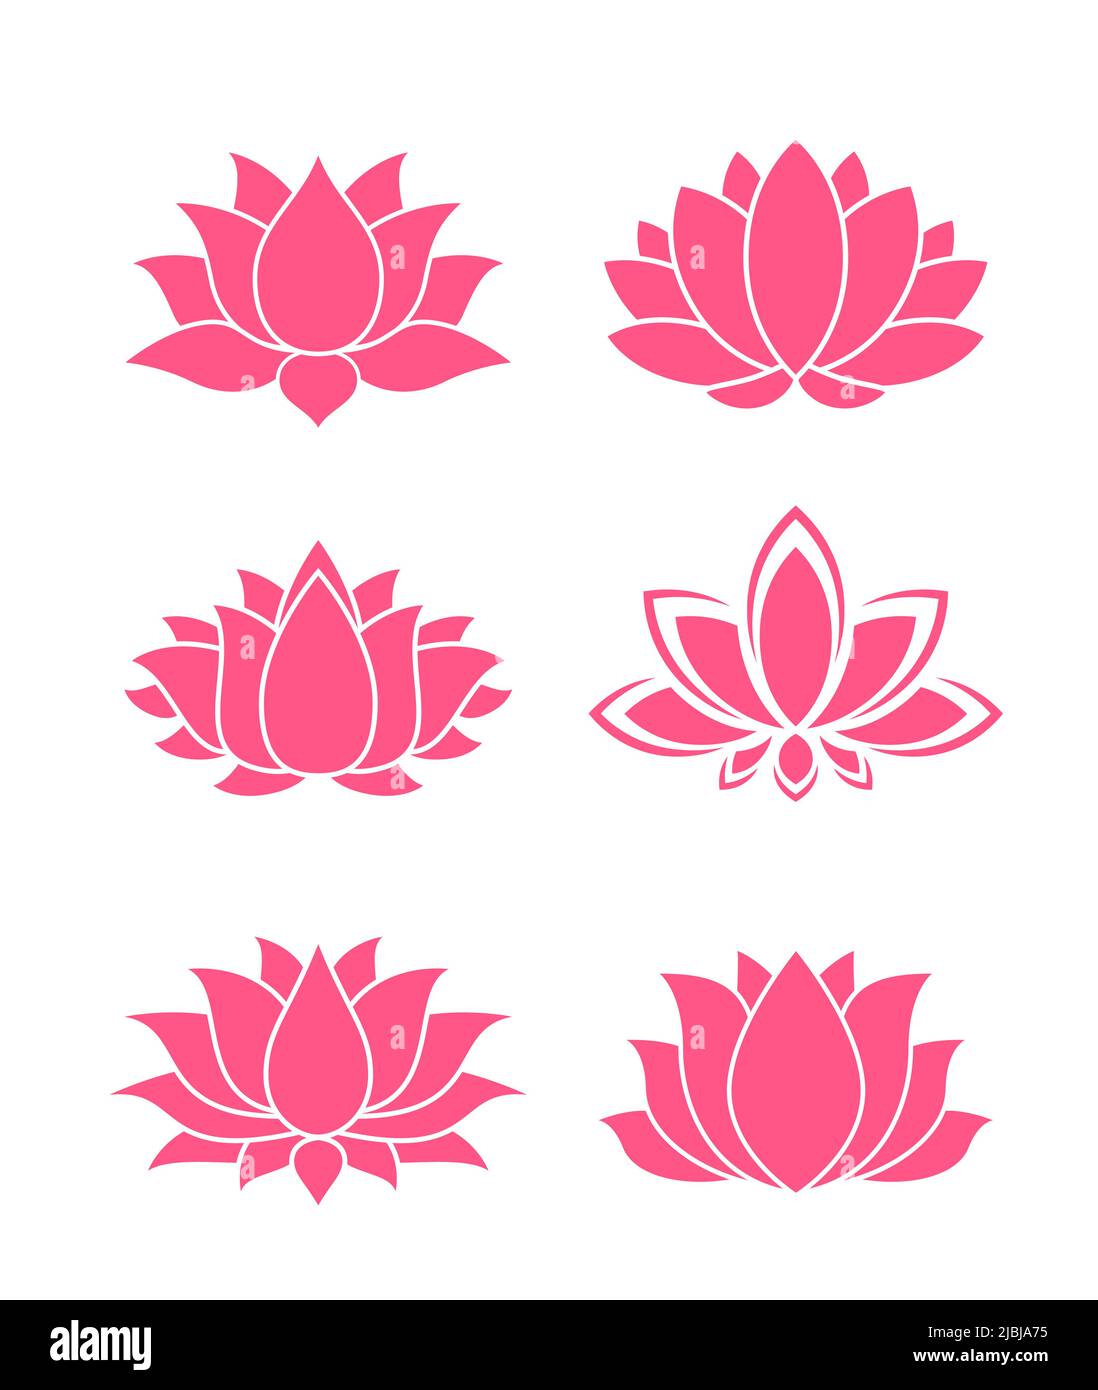 Pink lotus icons, flowers and floral blossoms. Yoga symbol in vector silhouette. Pink lotus petal buds for Asian spa or oriental ornaments decorations, religion and tattoo, Ayurveda and Zen meditation Stock Vector